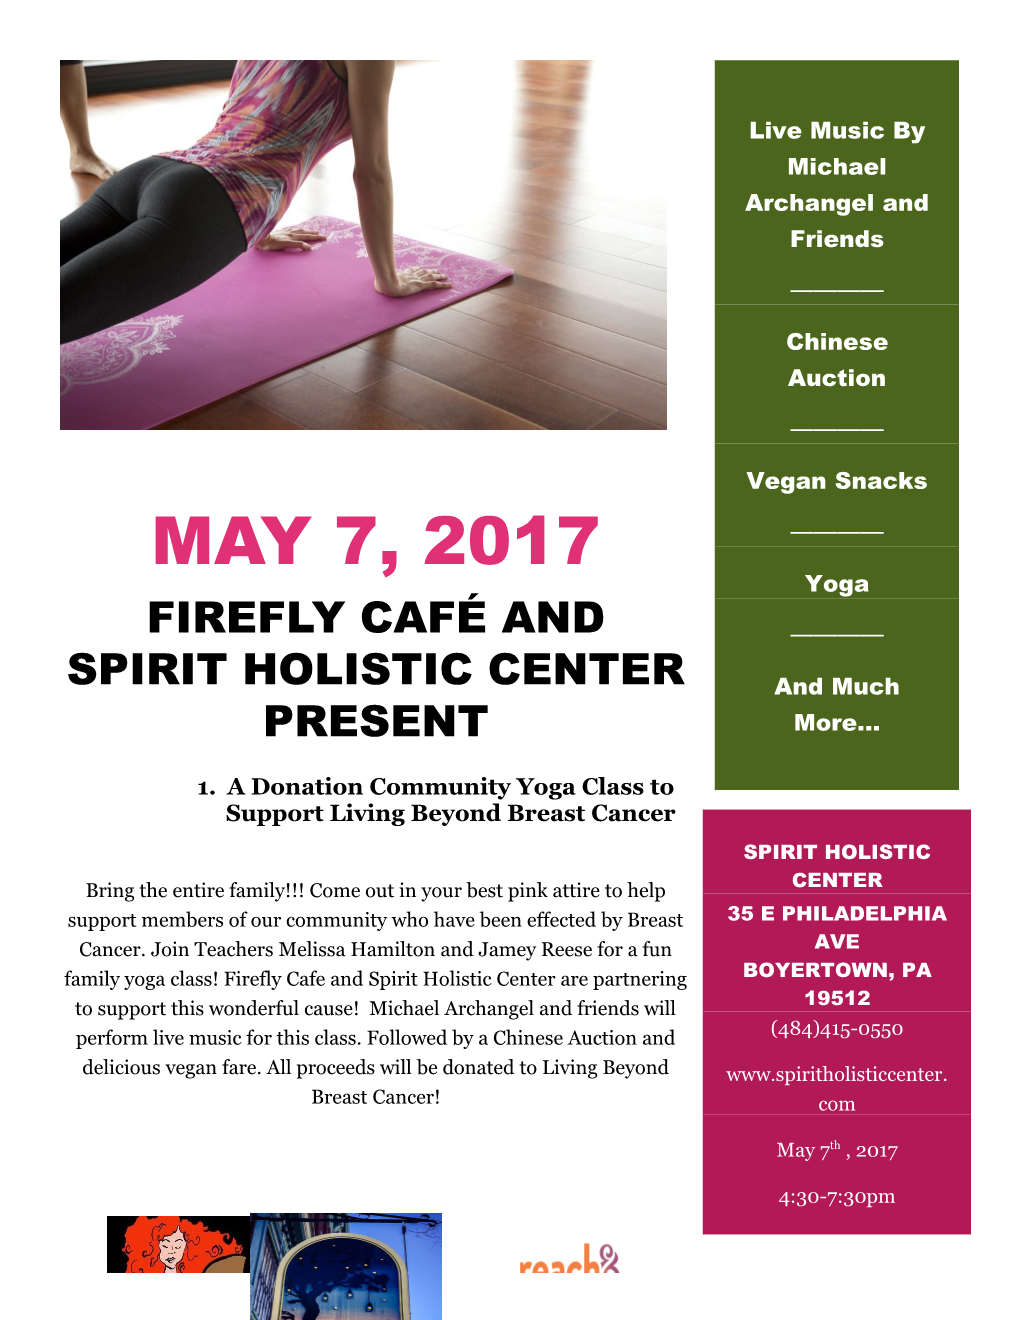 A Donation Community Yoga Class to Support Living Beyond Breast Cancer